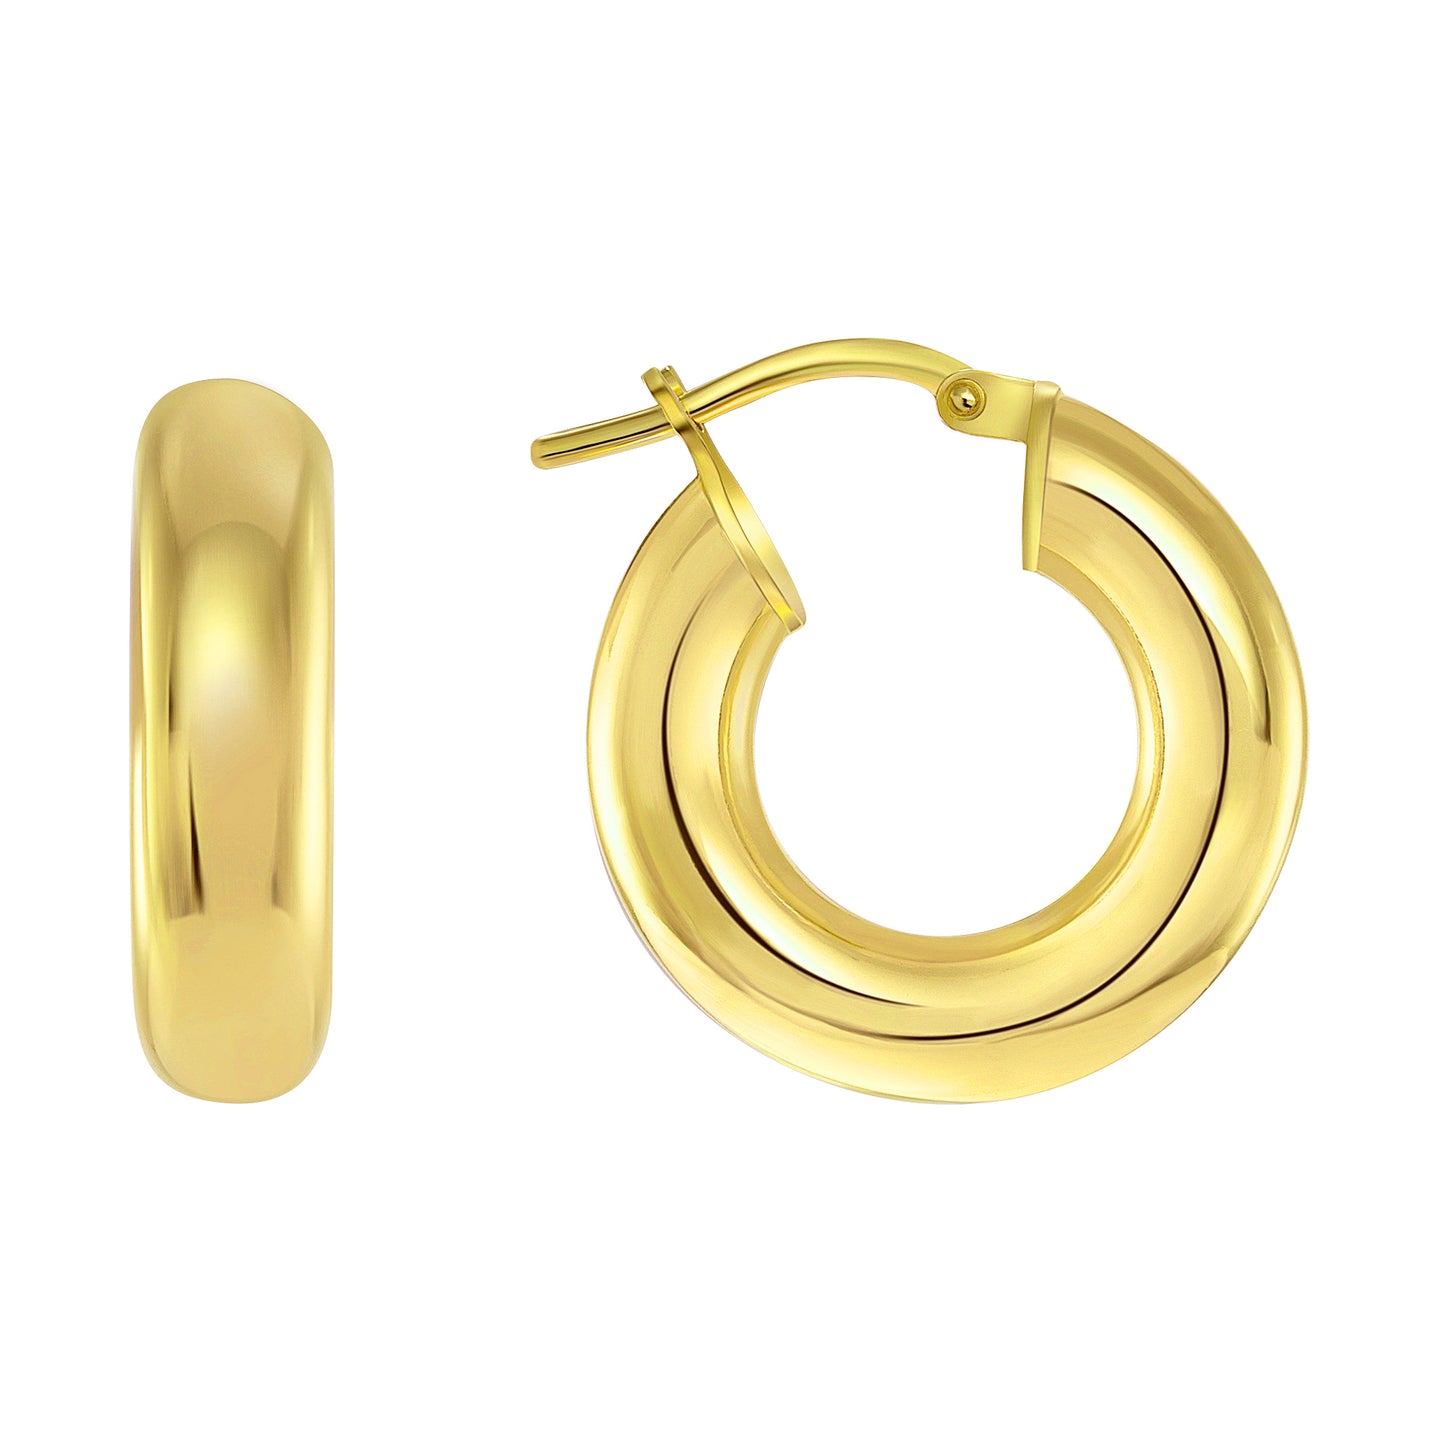 Silver 925 Gold Plated 10MM Round Plain Hoop Earrings. ITHP04-10MMG